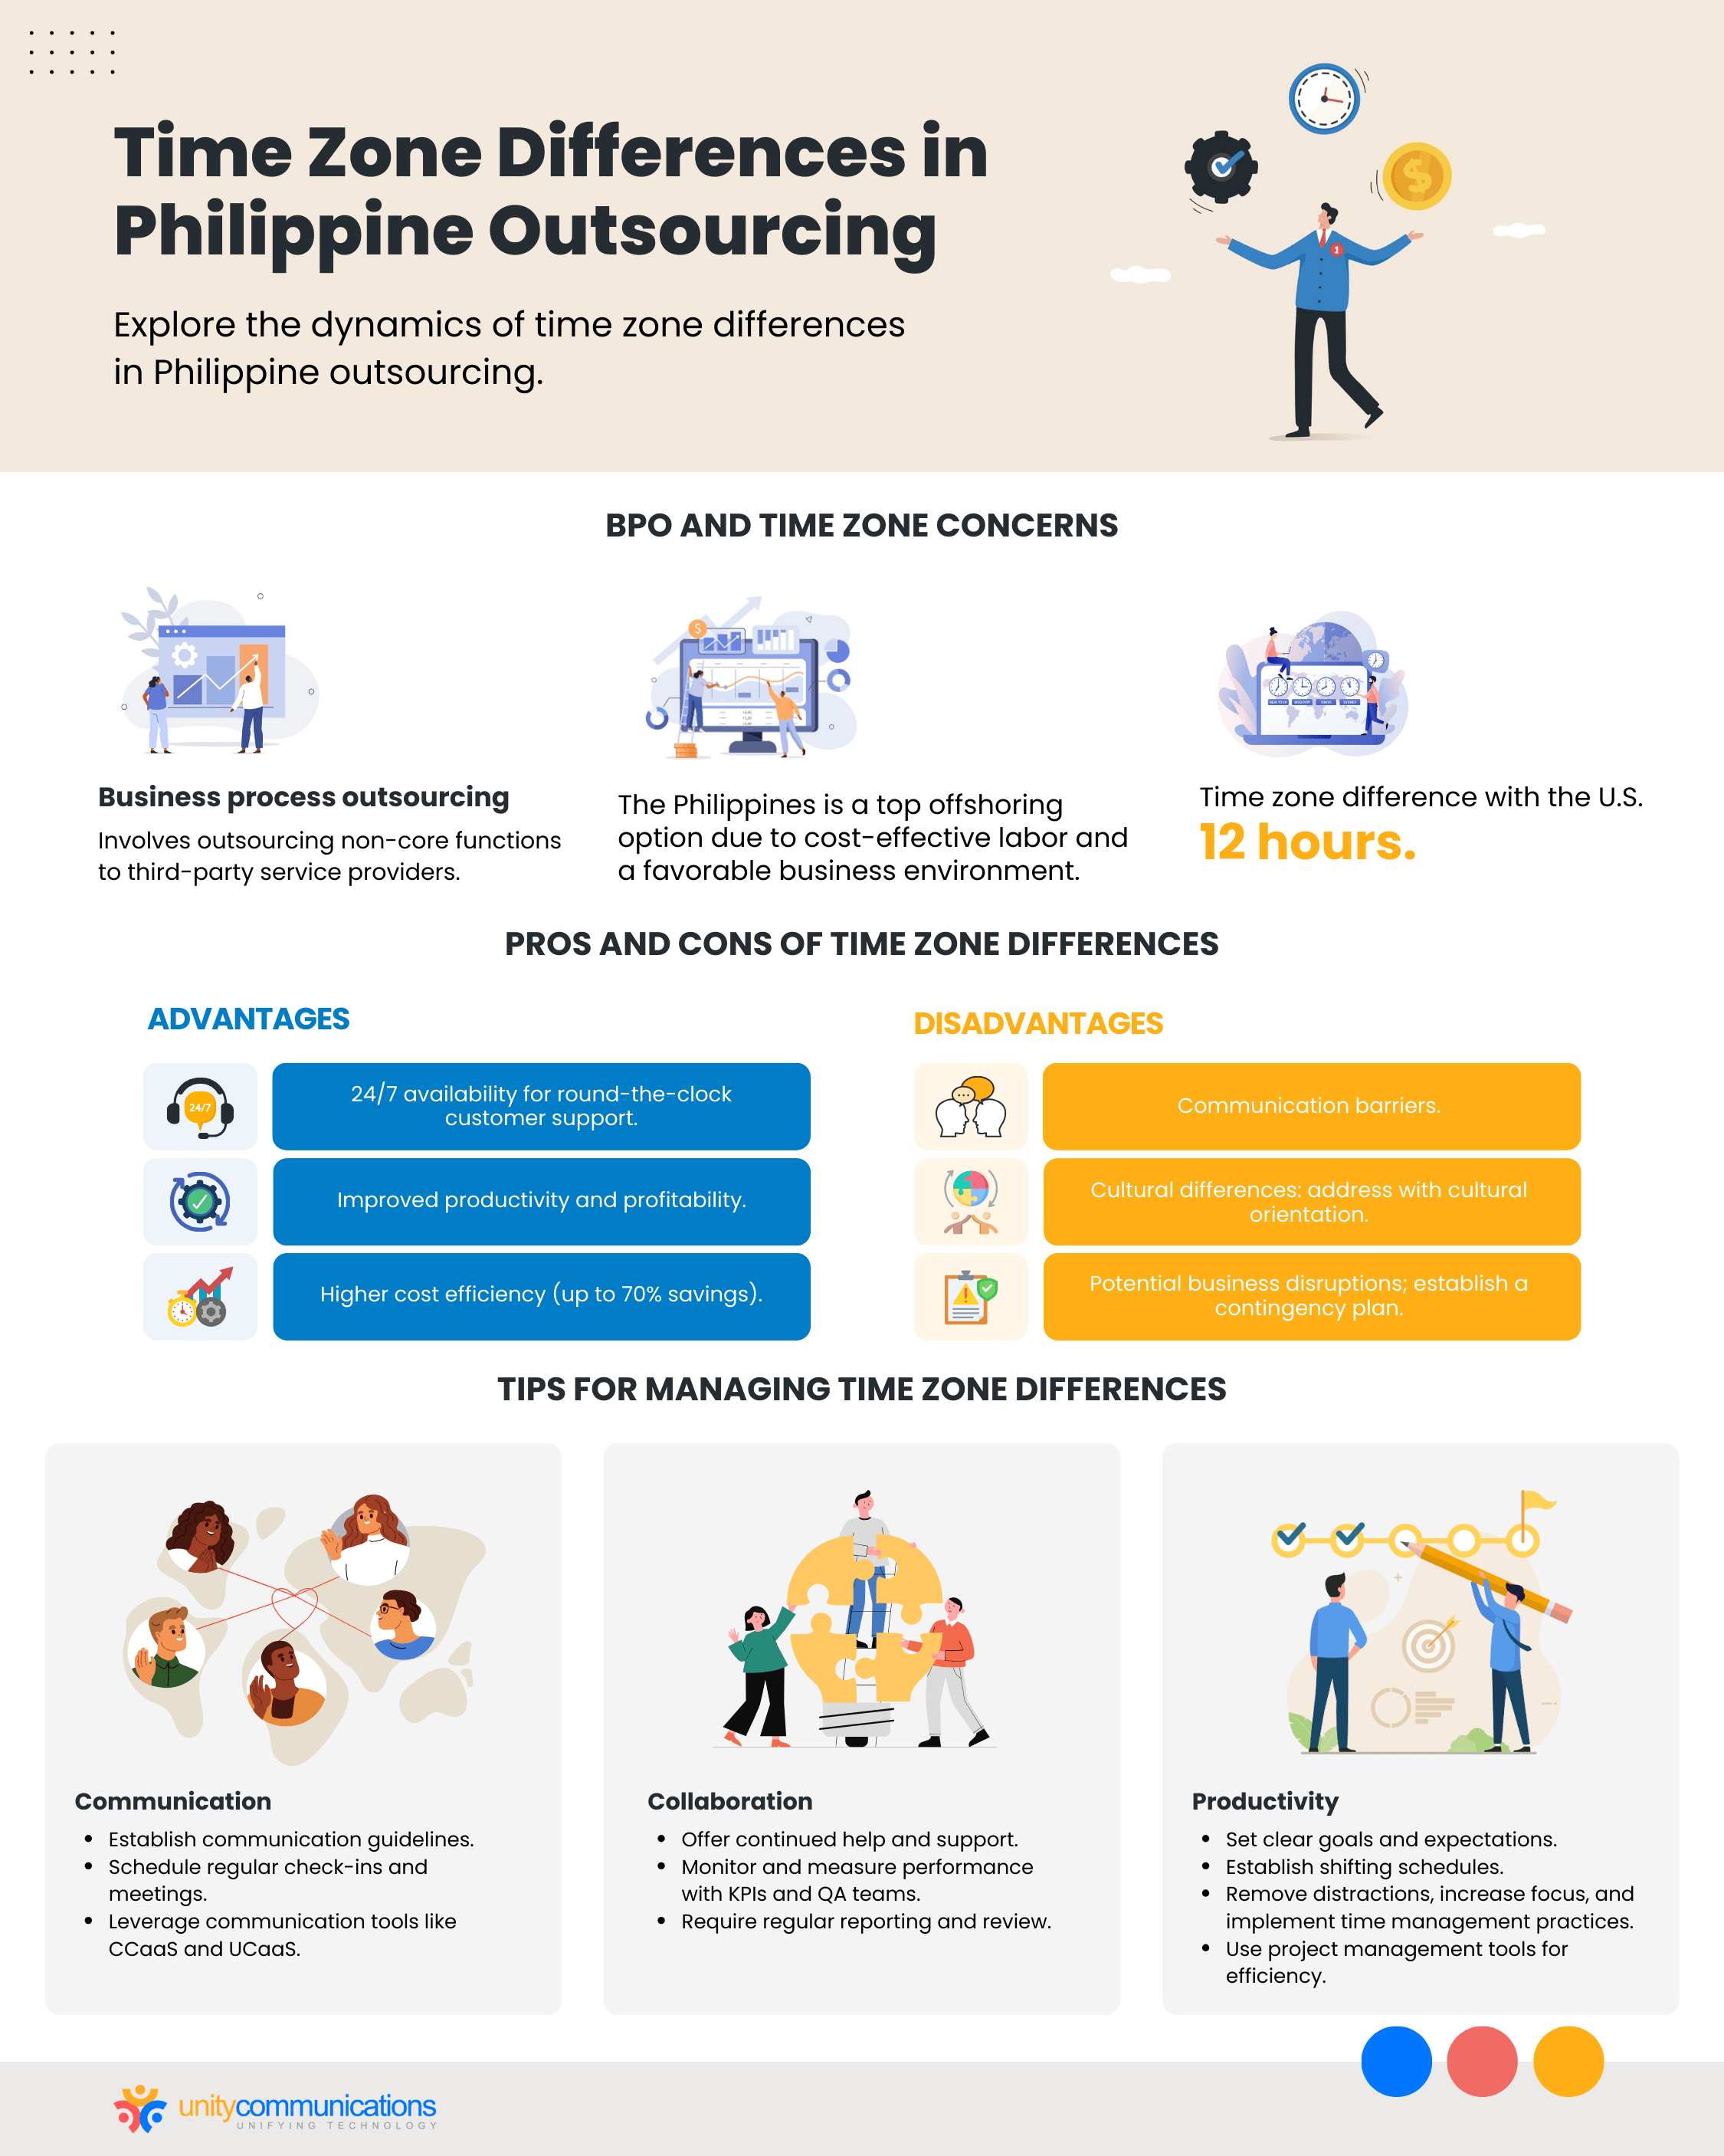 Time Zone Differences in Philippine Outsourcing 